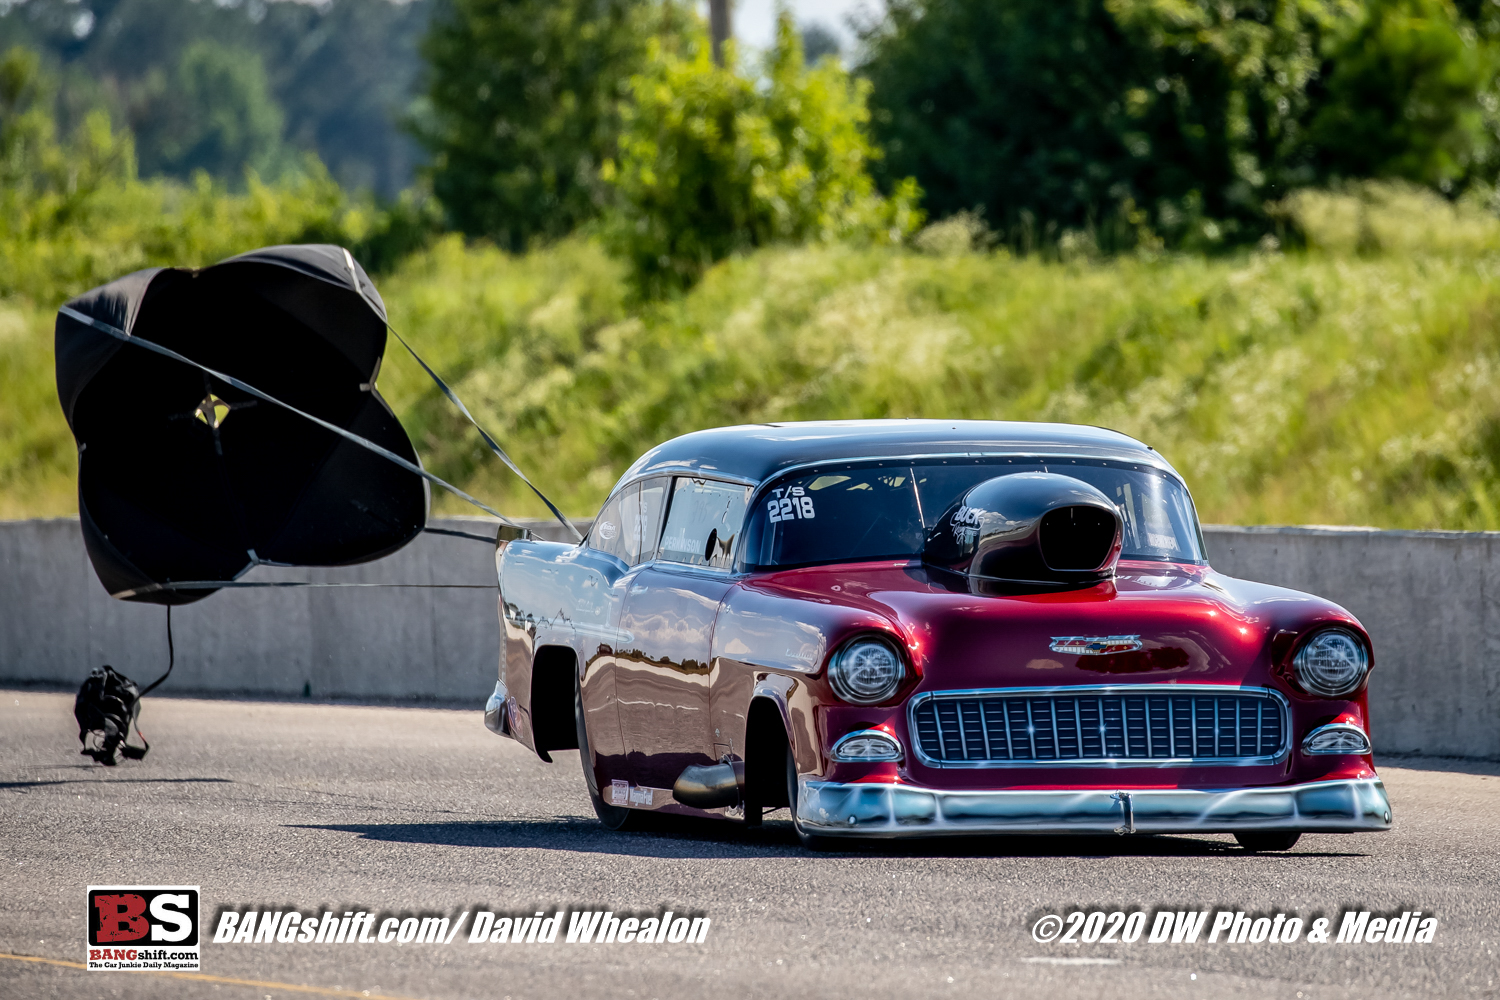 PDRA Carolina Showdown Action Photos: One Last Blast Of Images From The Killer Event At Darlington